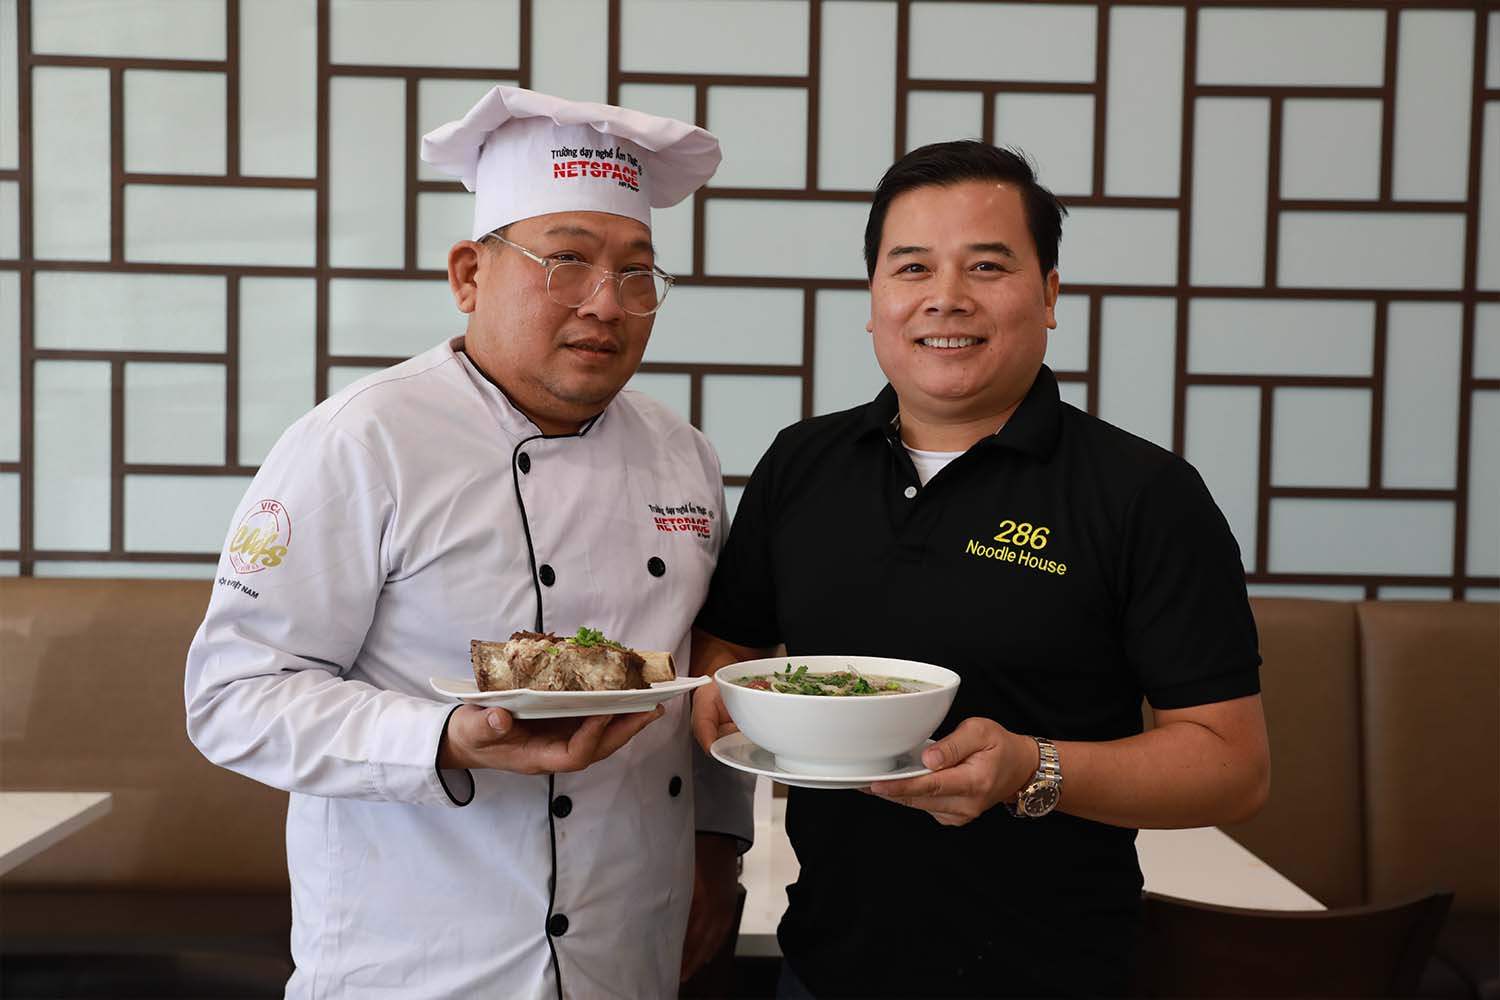 Former chef (left) and current owner (right) of 286 Noodle House